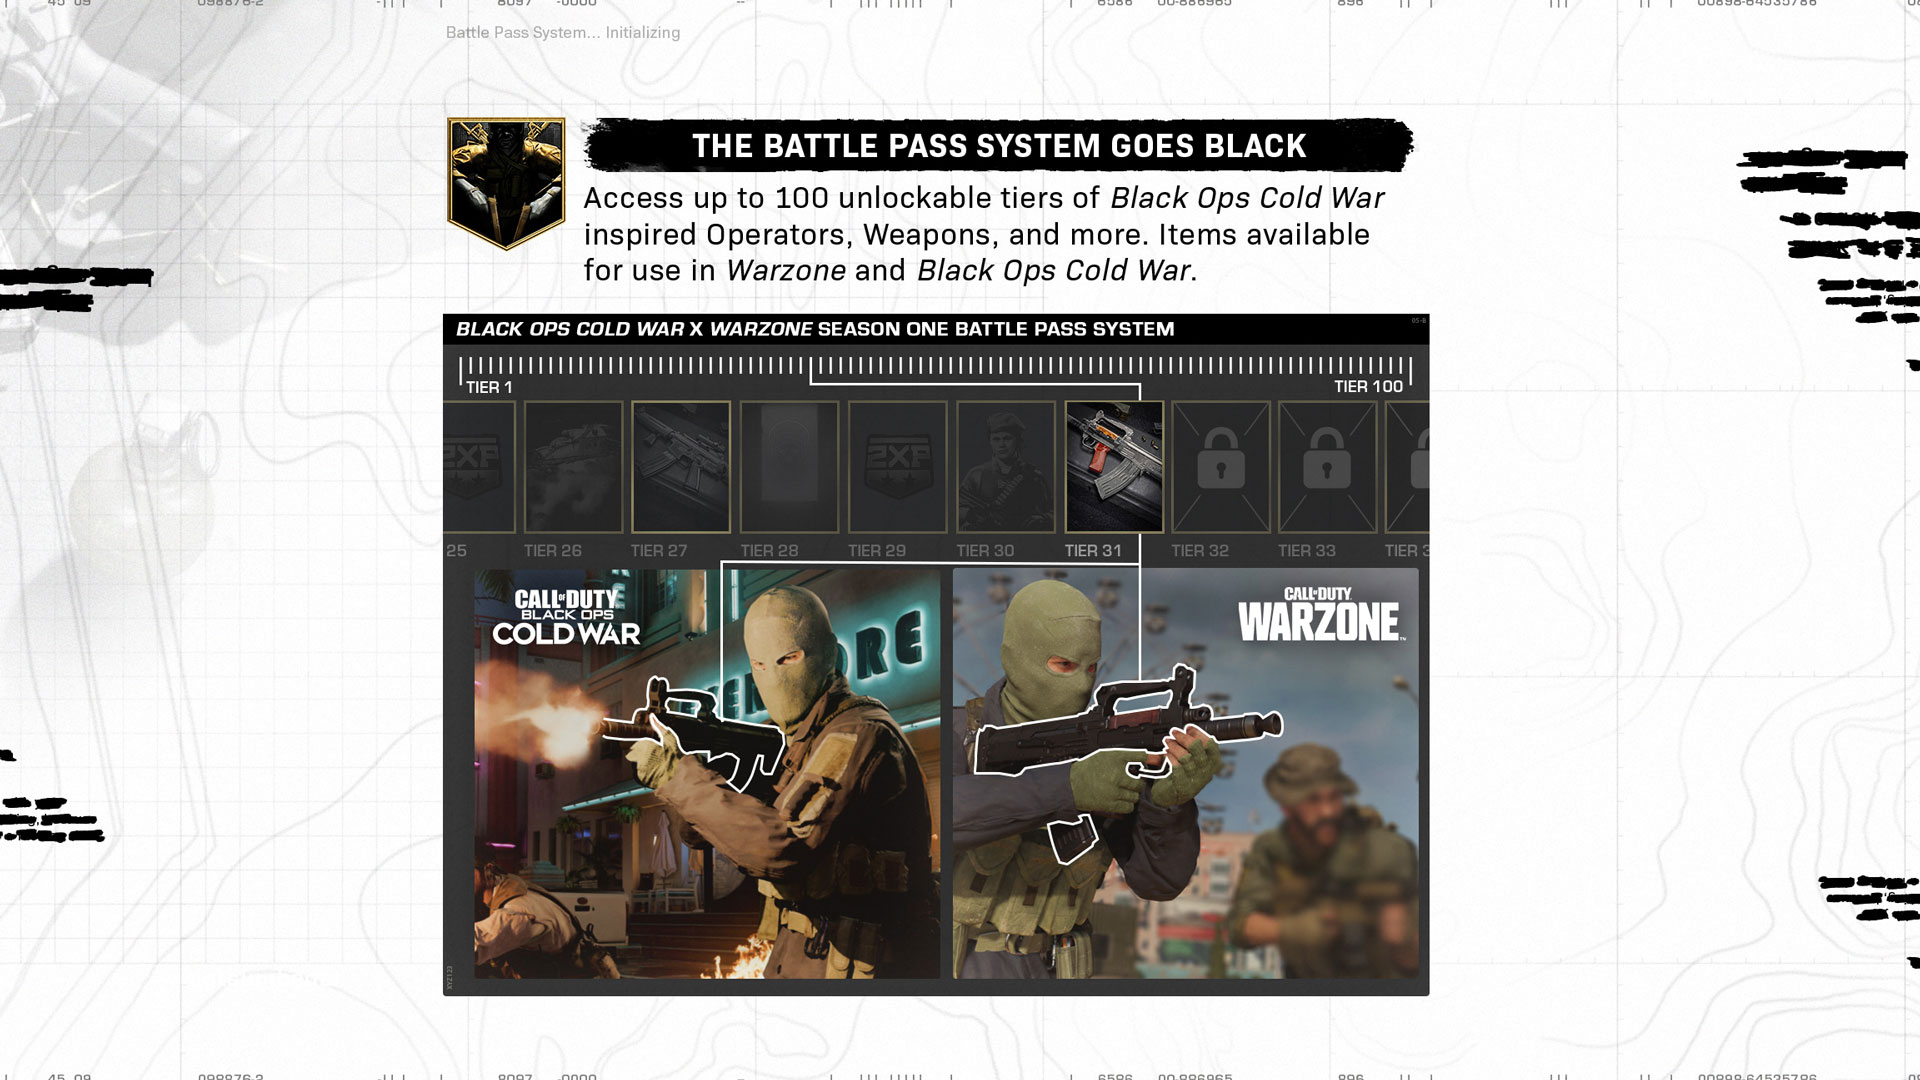 call of duty cold war (pc key)